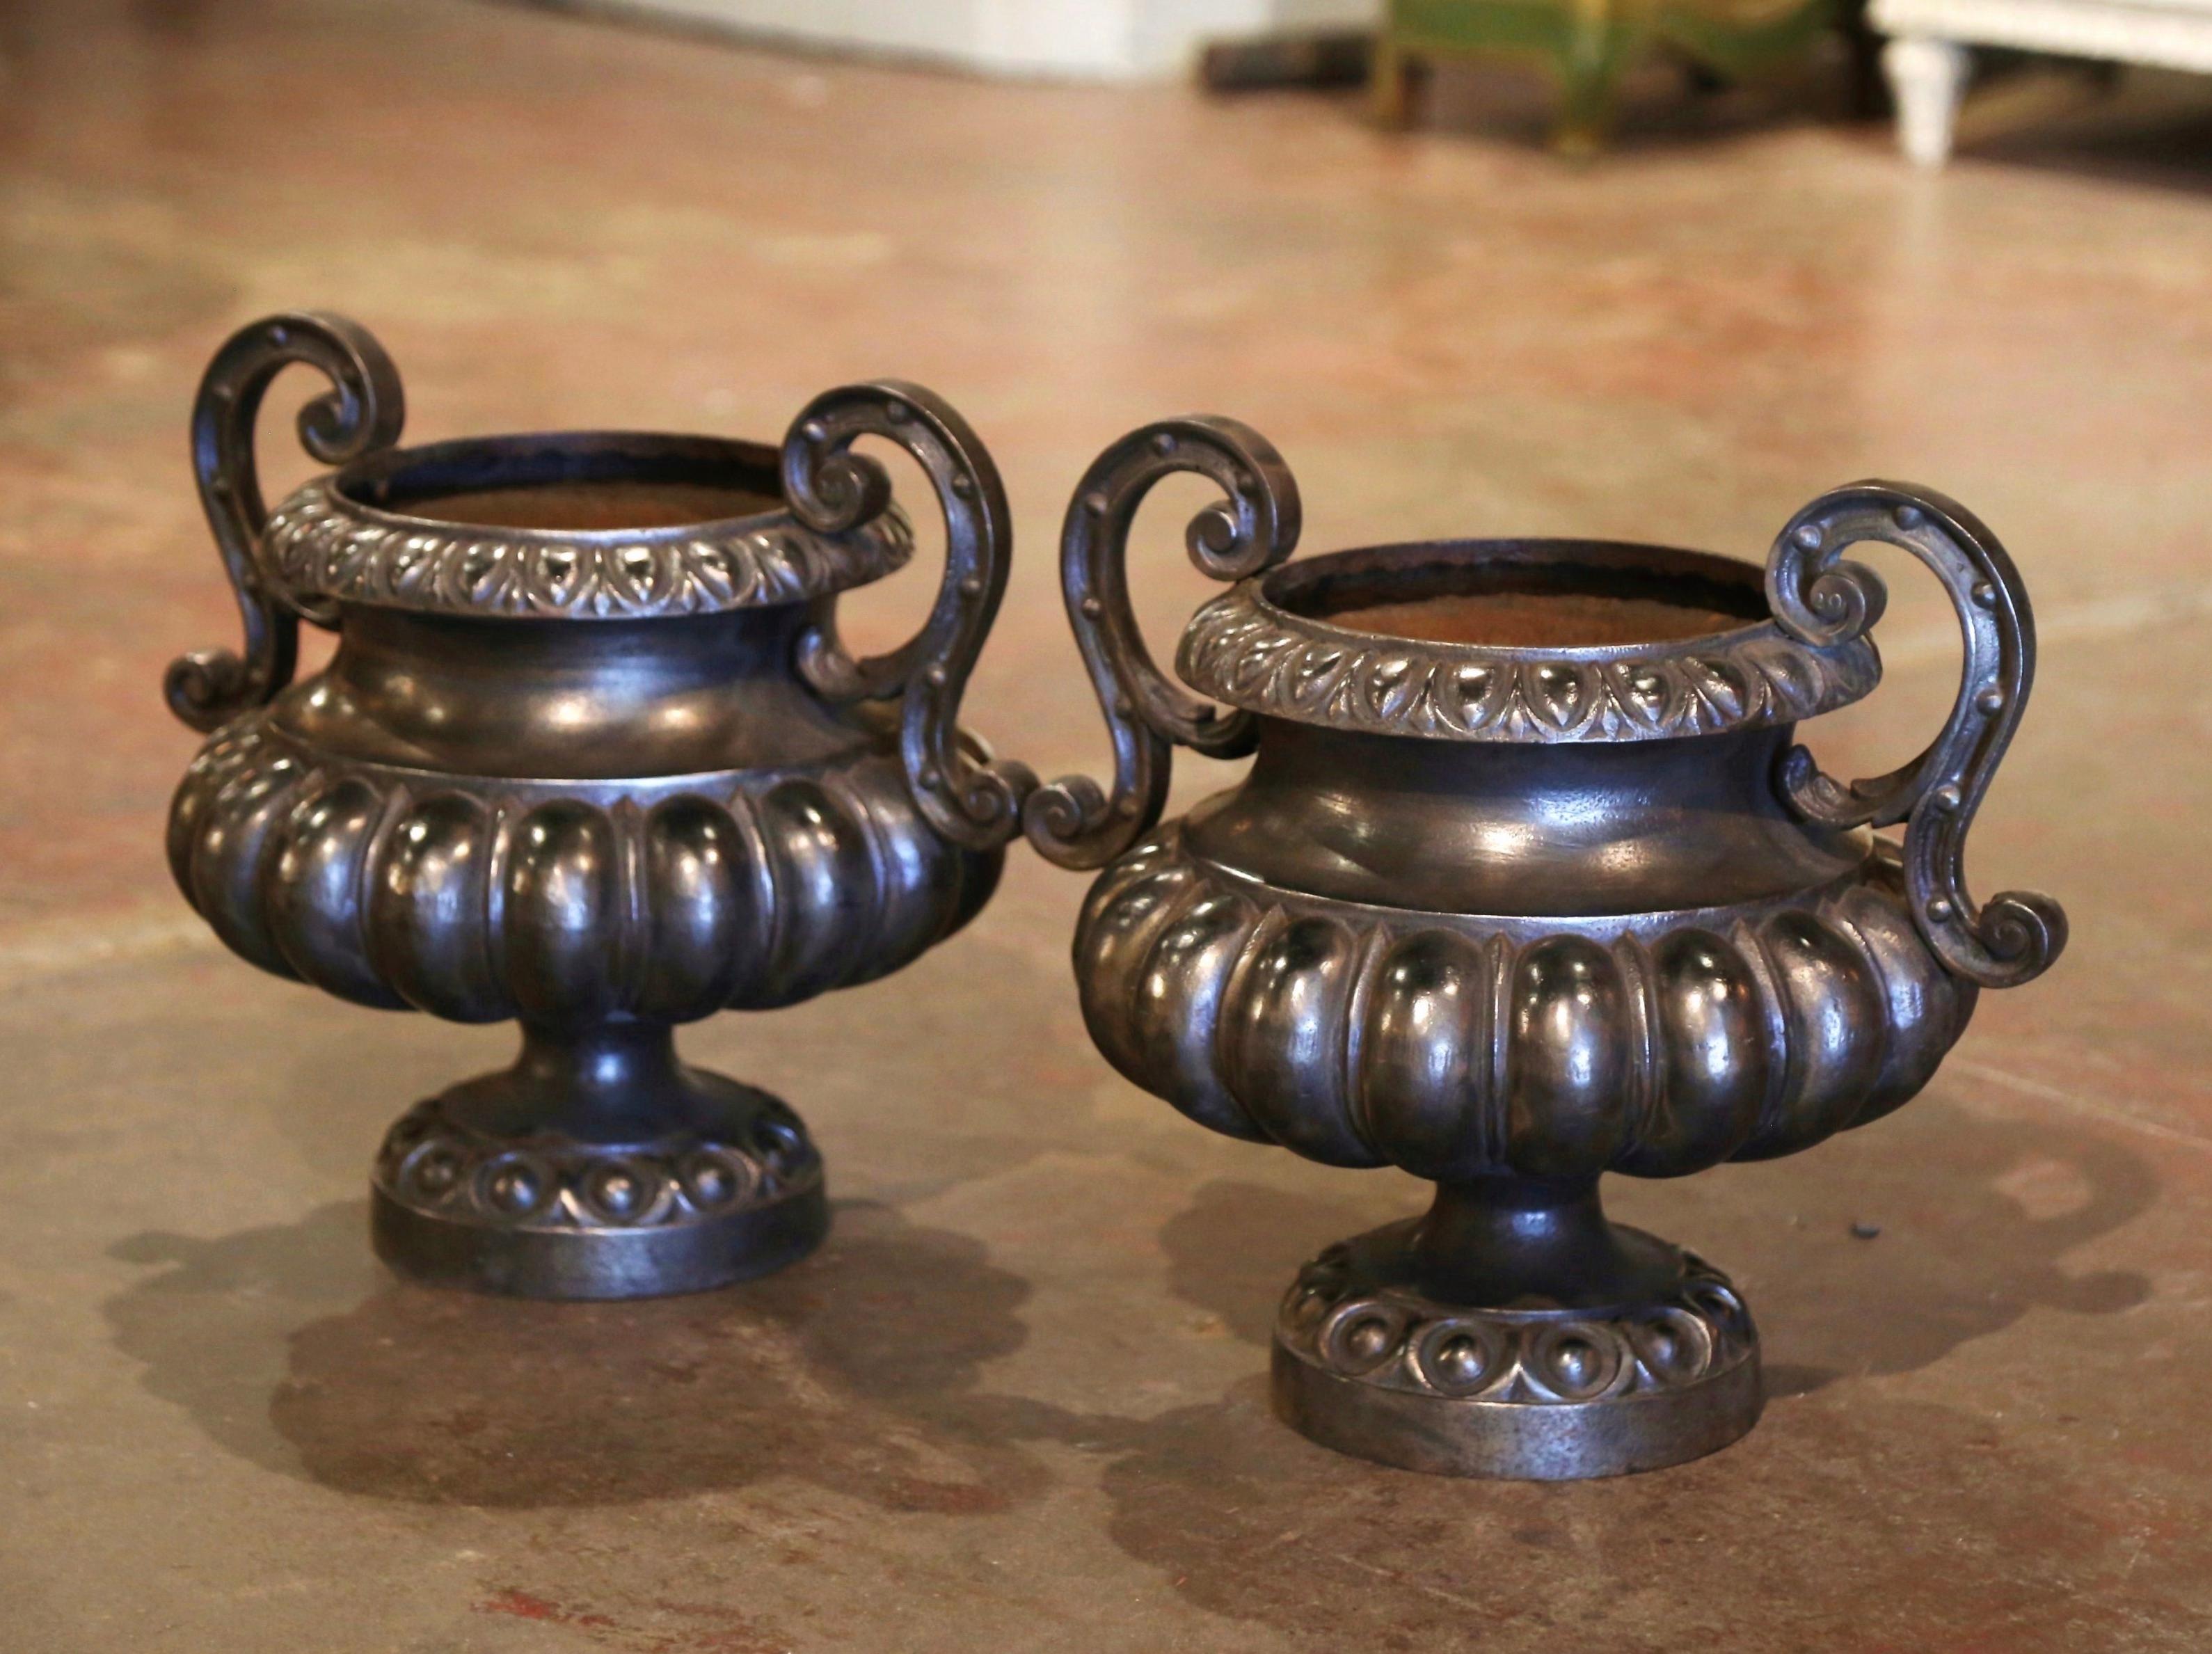 Pair of 19th Century French Neoclassical Polished Iron Garden Urn Planters In Excellent Condition For Sale In Dallas, TX